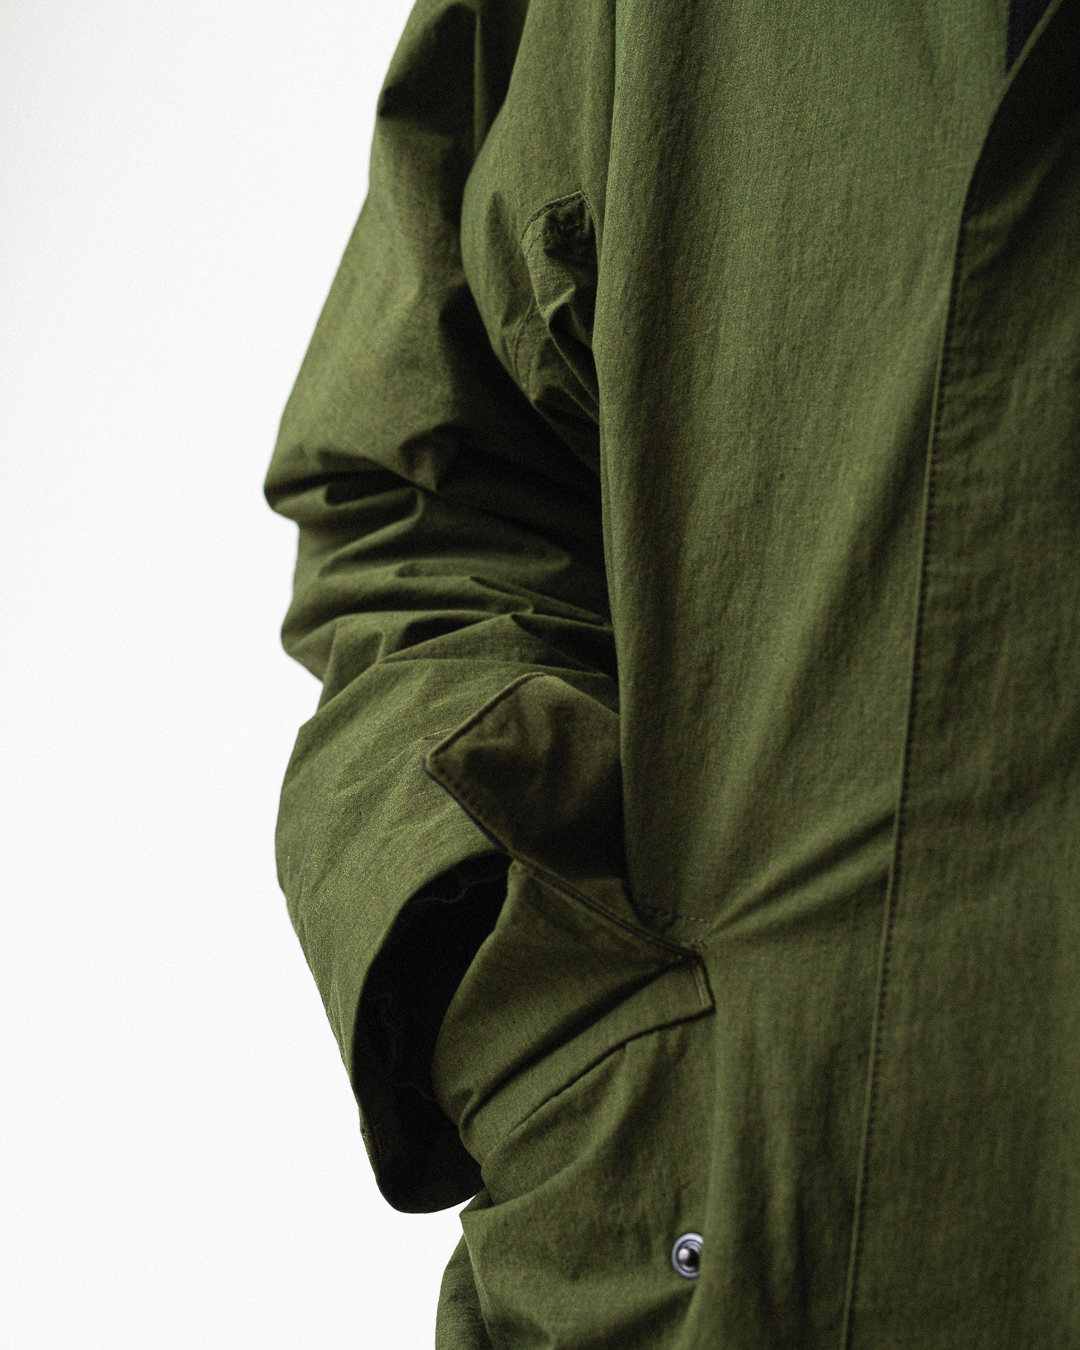 Norse Store | Shipping Worldwide - Margaret Howell MHL DECK COAT - Green